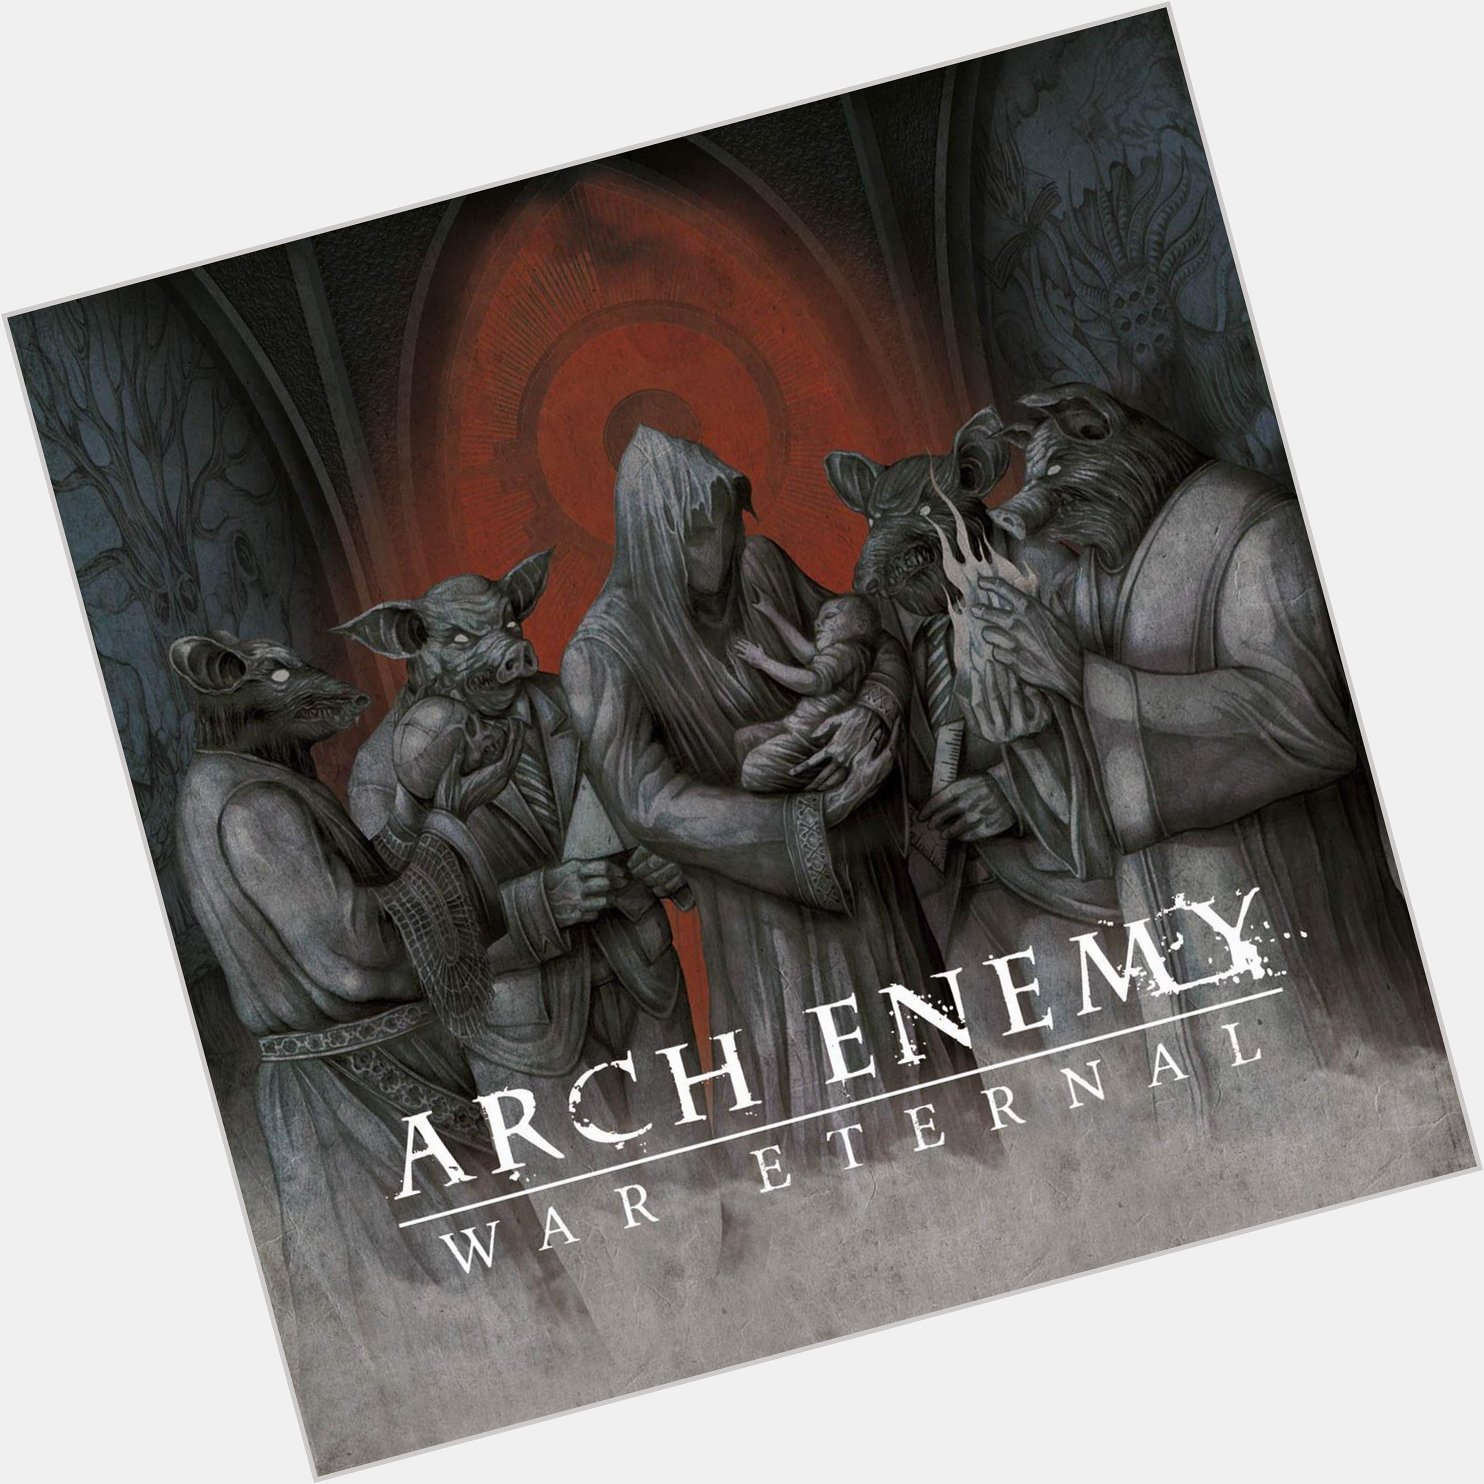  Never Forgive, Never Forget
from War Eternal
by Arch Enemy

Happy Birthday, Alissa White-Gluz 